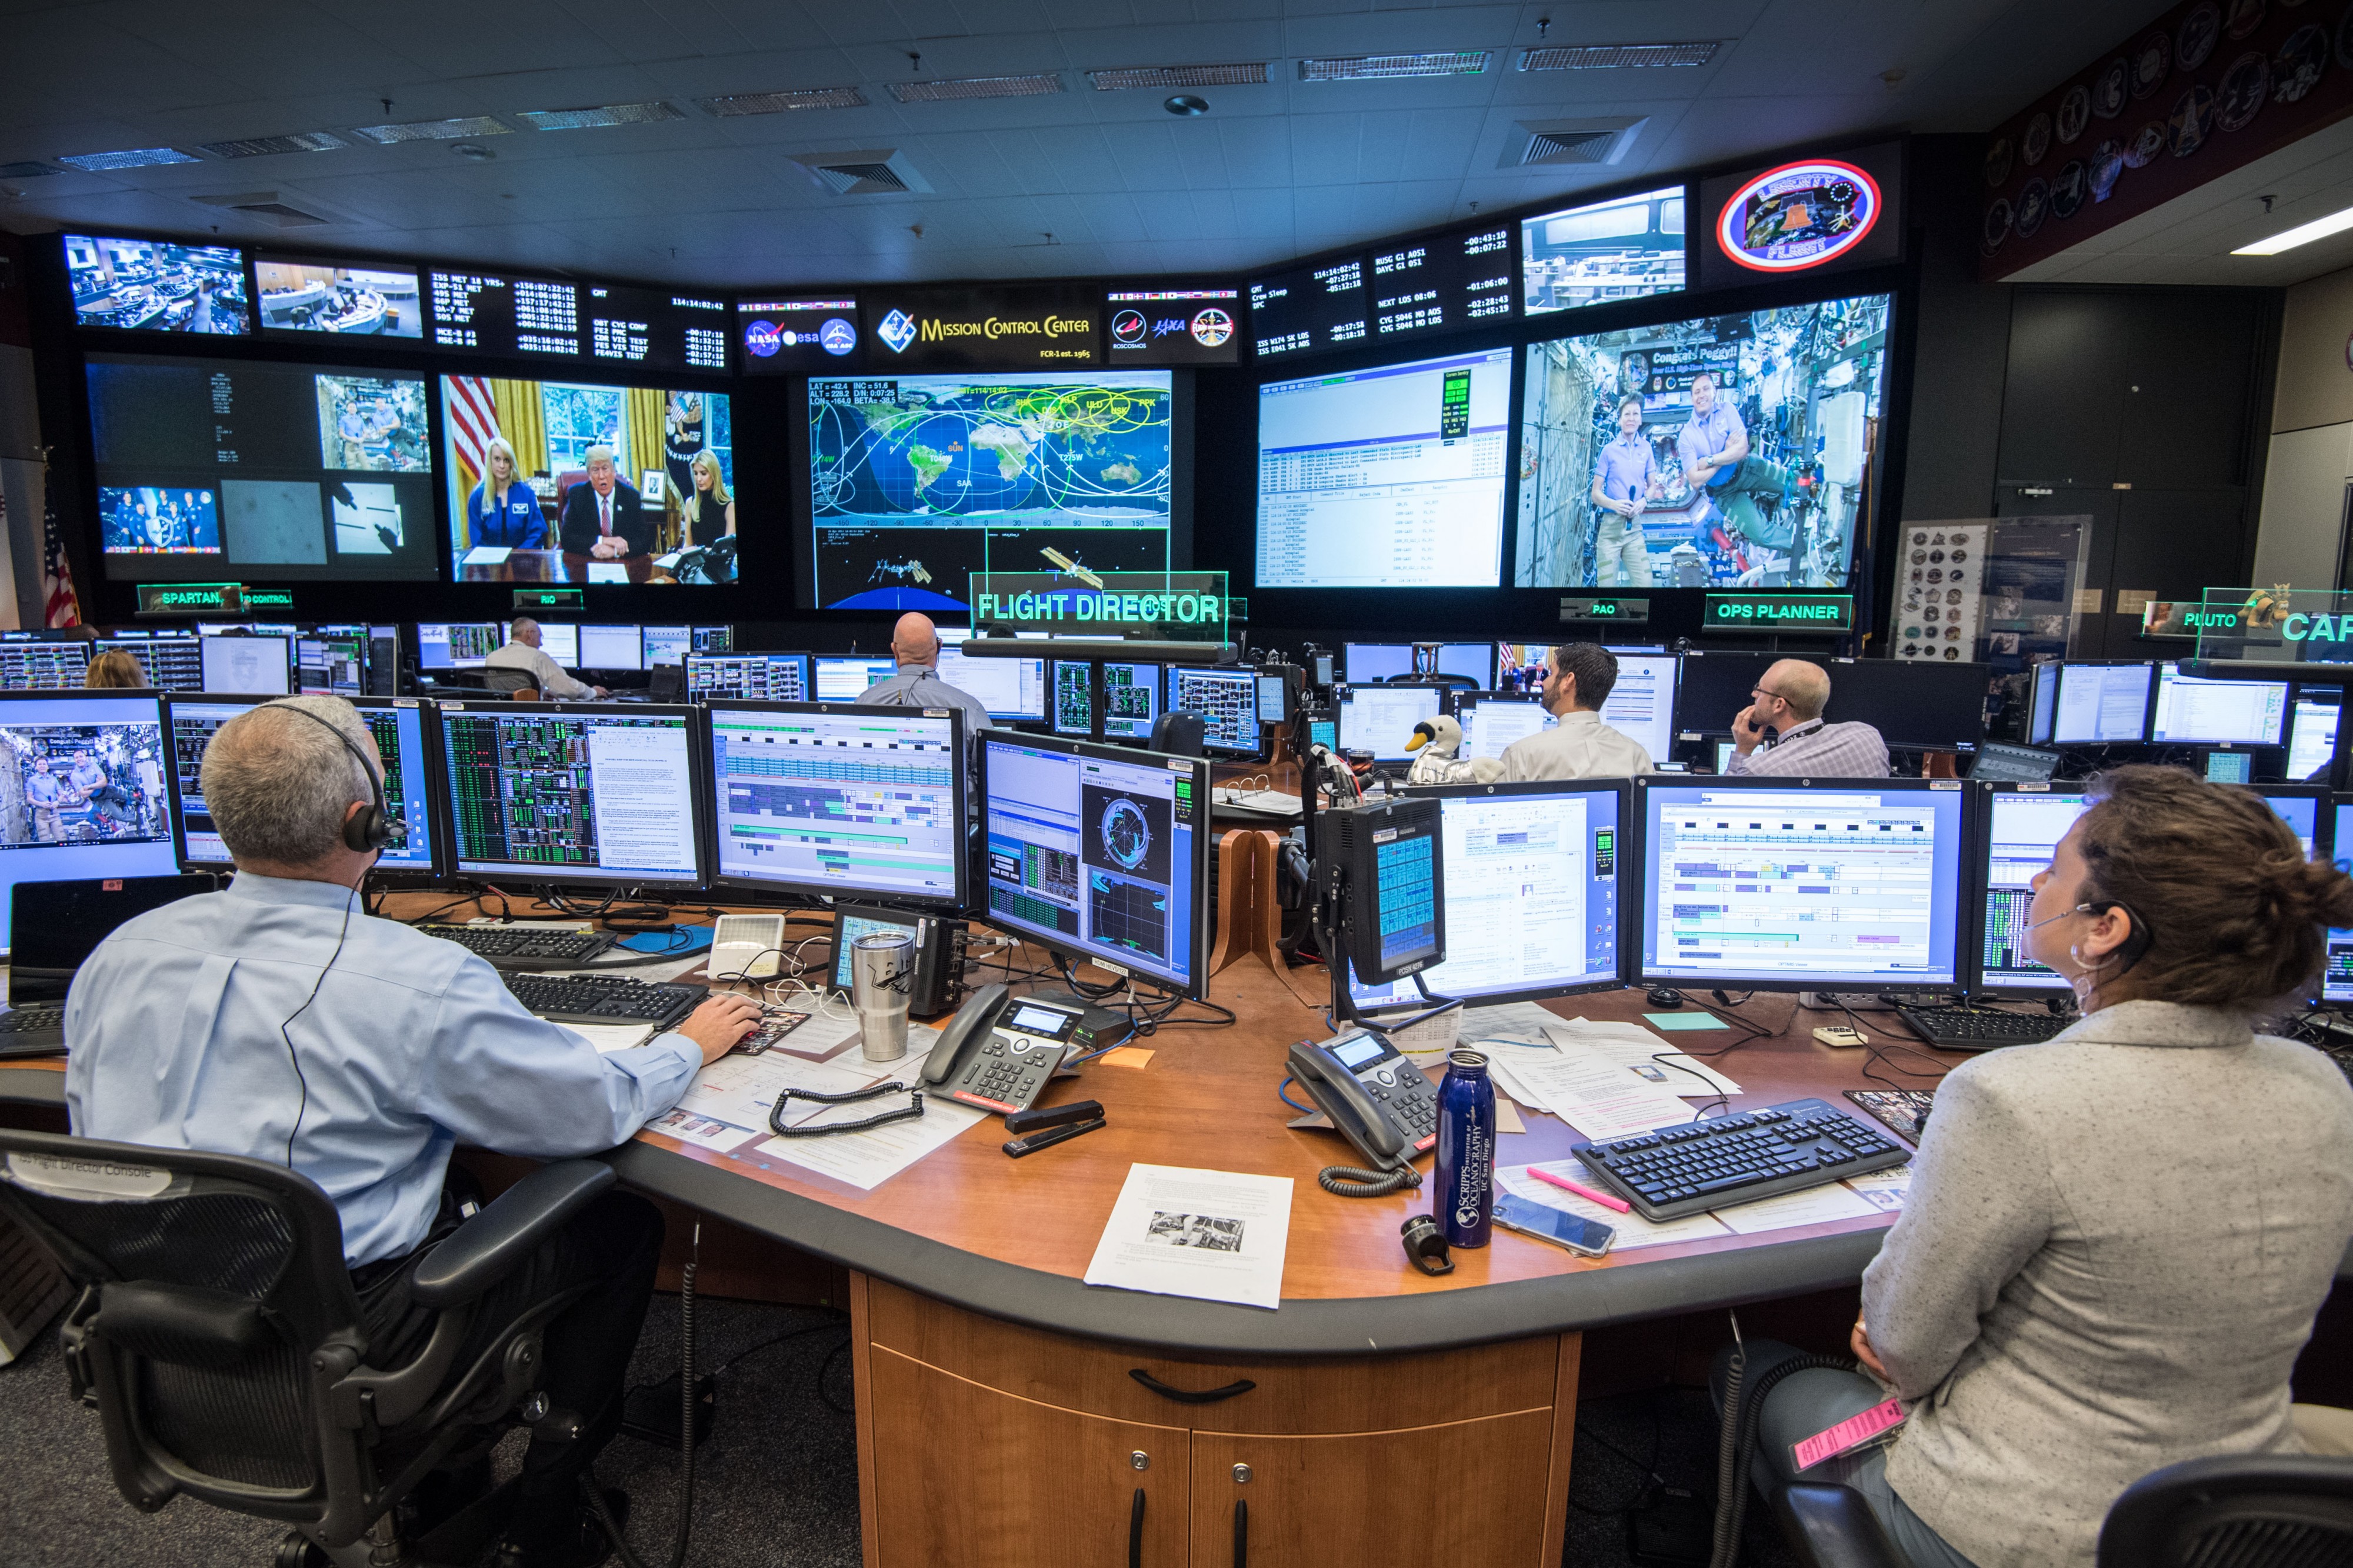 Earth-to-space call from the Oval Office seen at Mission Control